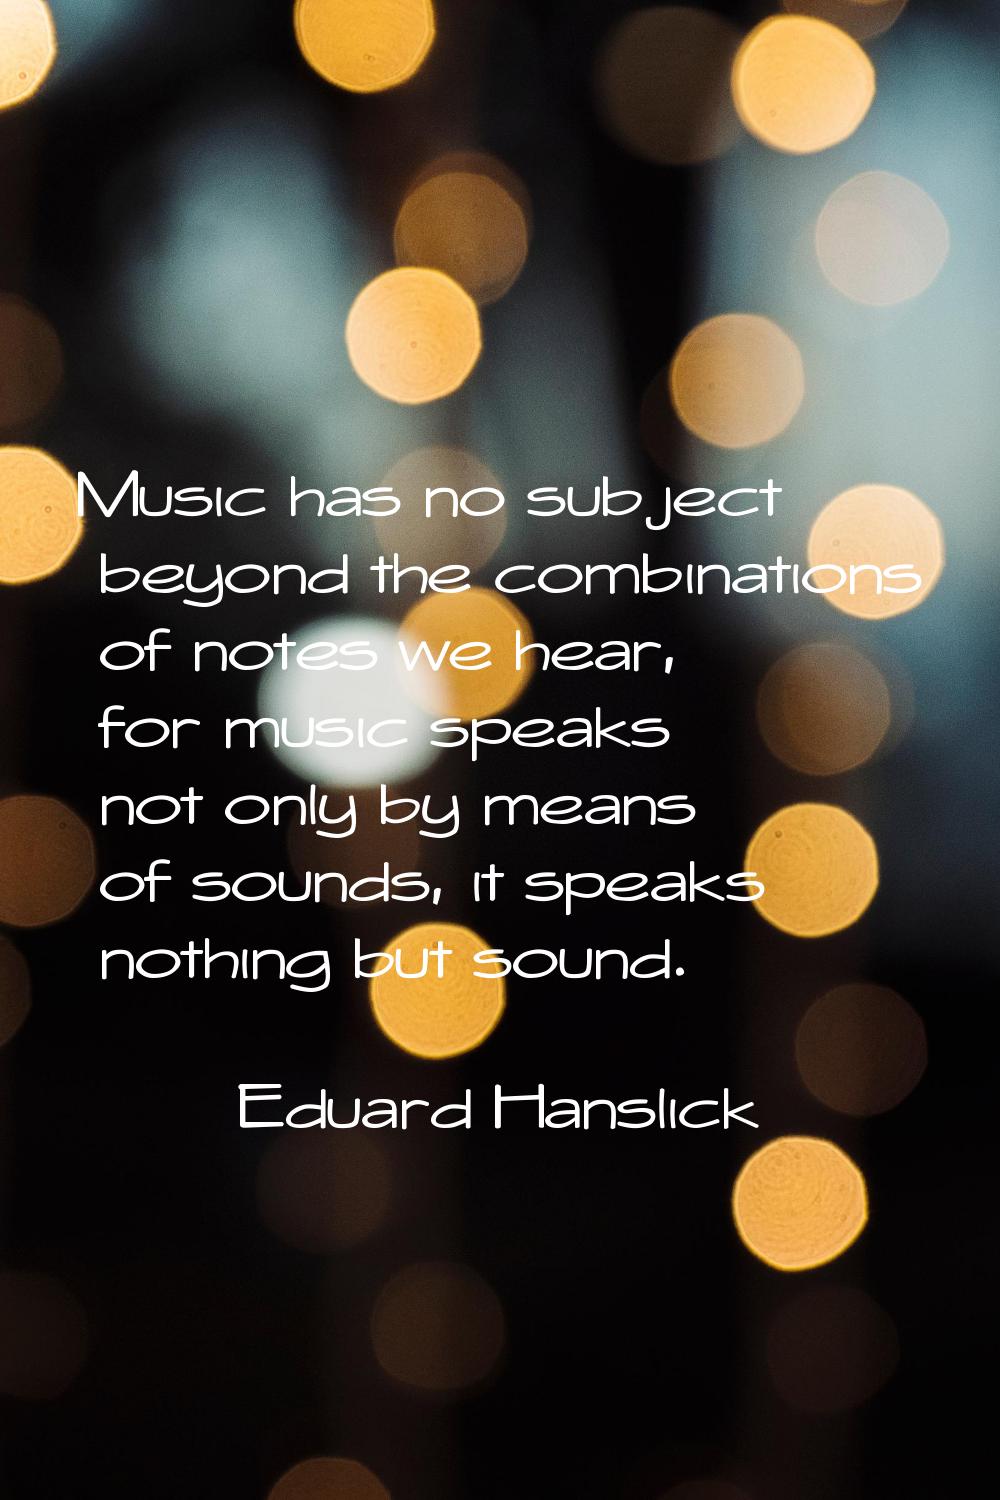 Music has no subject beyond the combinations of notes we hear, for music speaks not only by means o